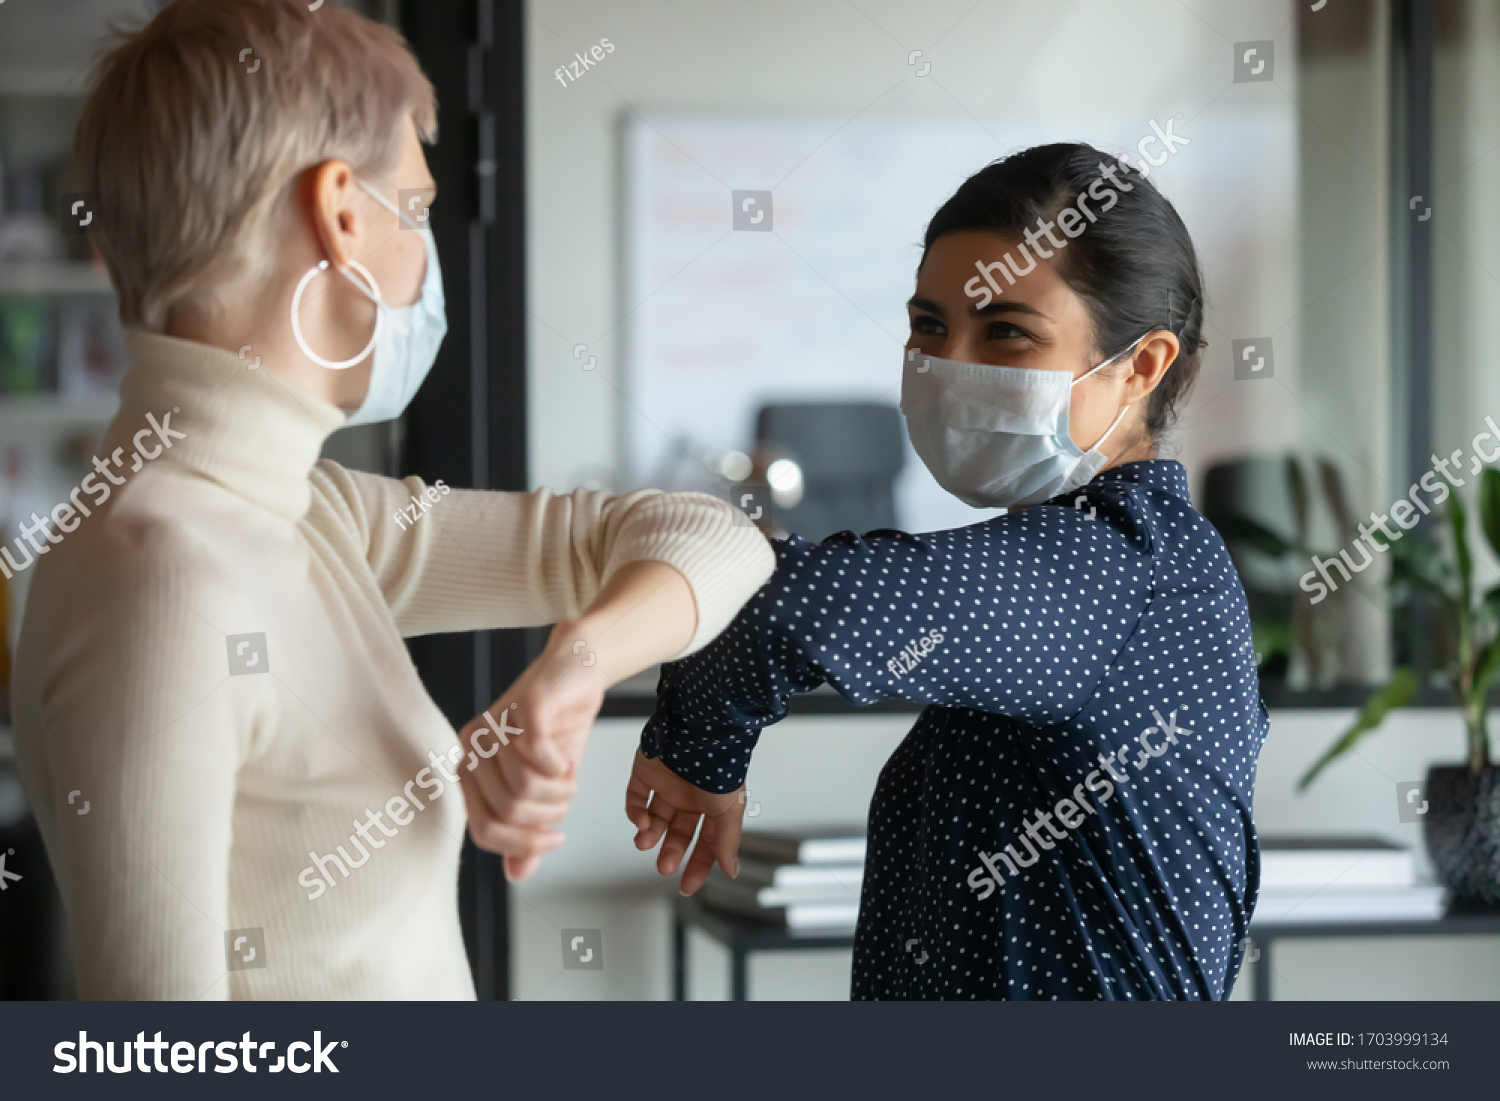 Smiling diverse female colleagues wearing protective face masks greeting bumping elbows at workplace, woman coworkers in facial covers protect from COVID-19 coronavirus in office, healthcare concept #1703999134